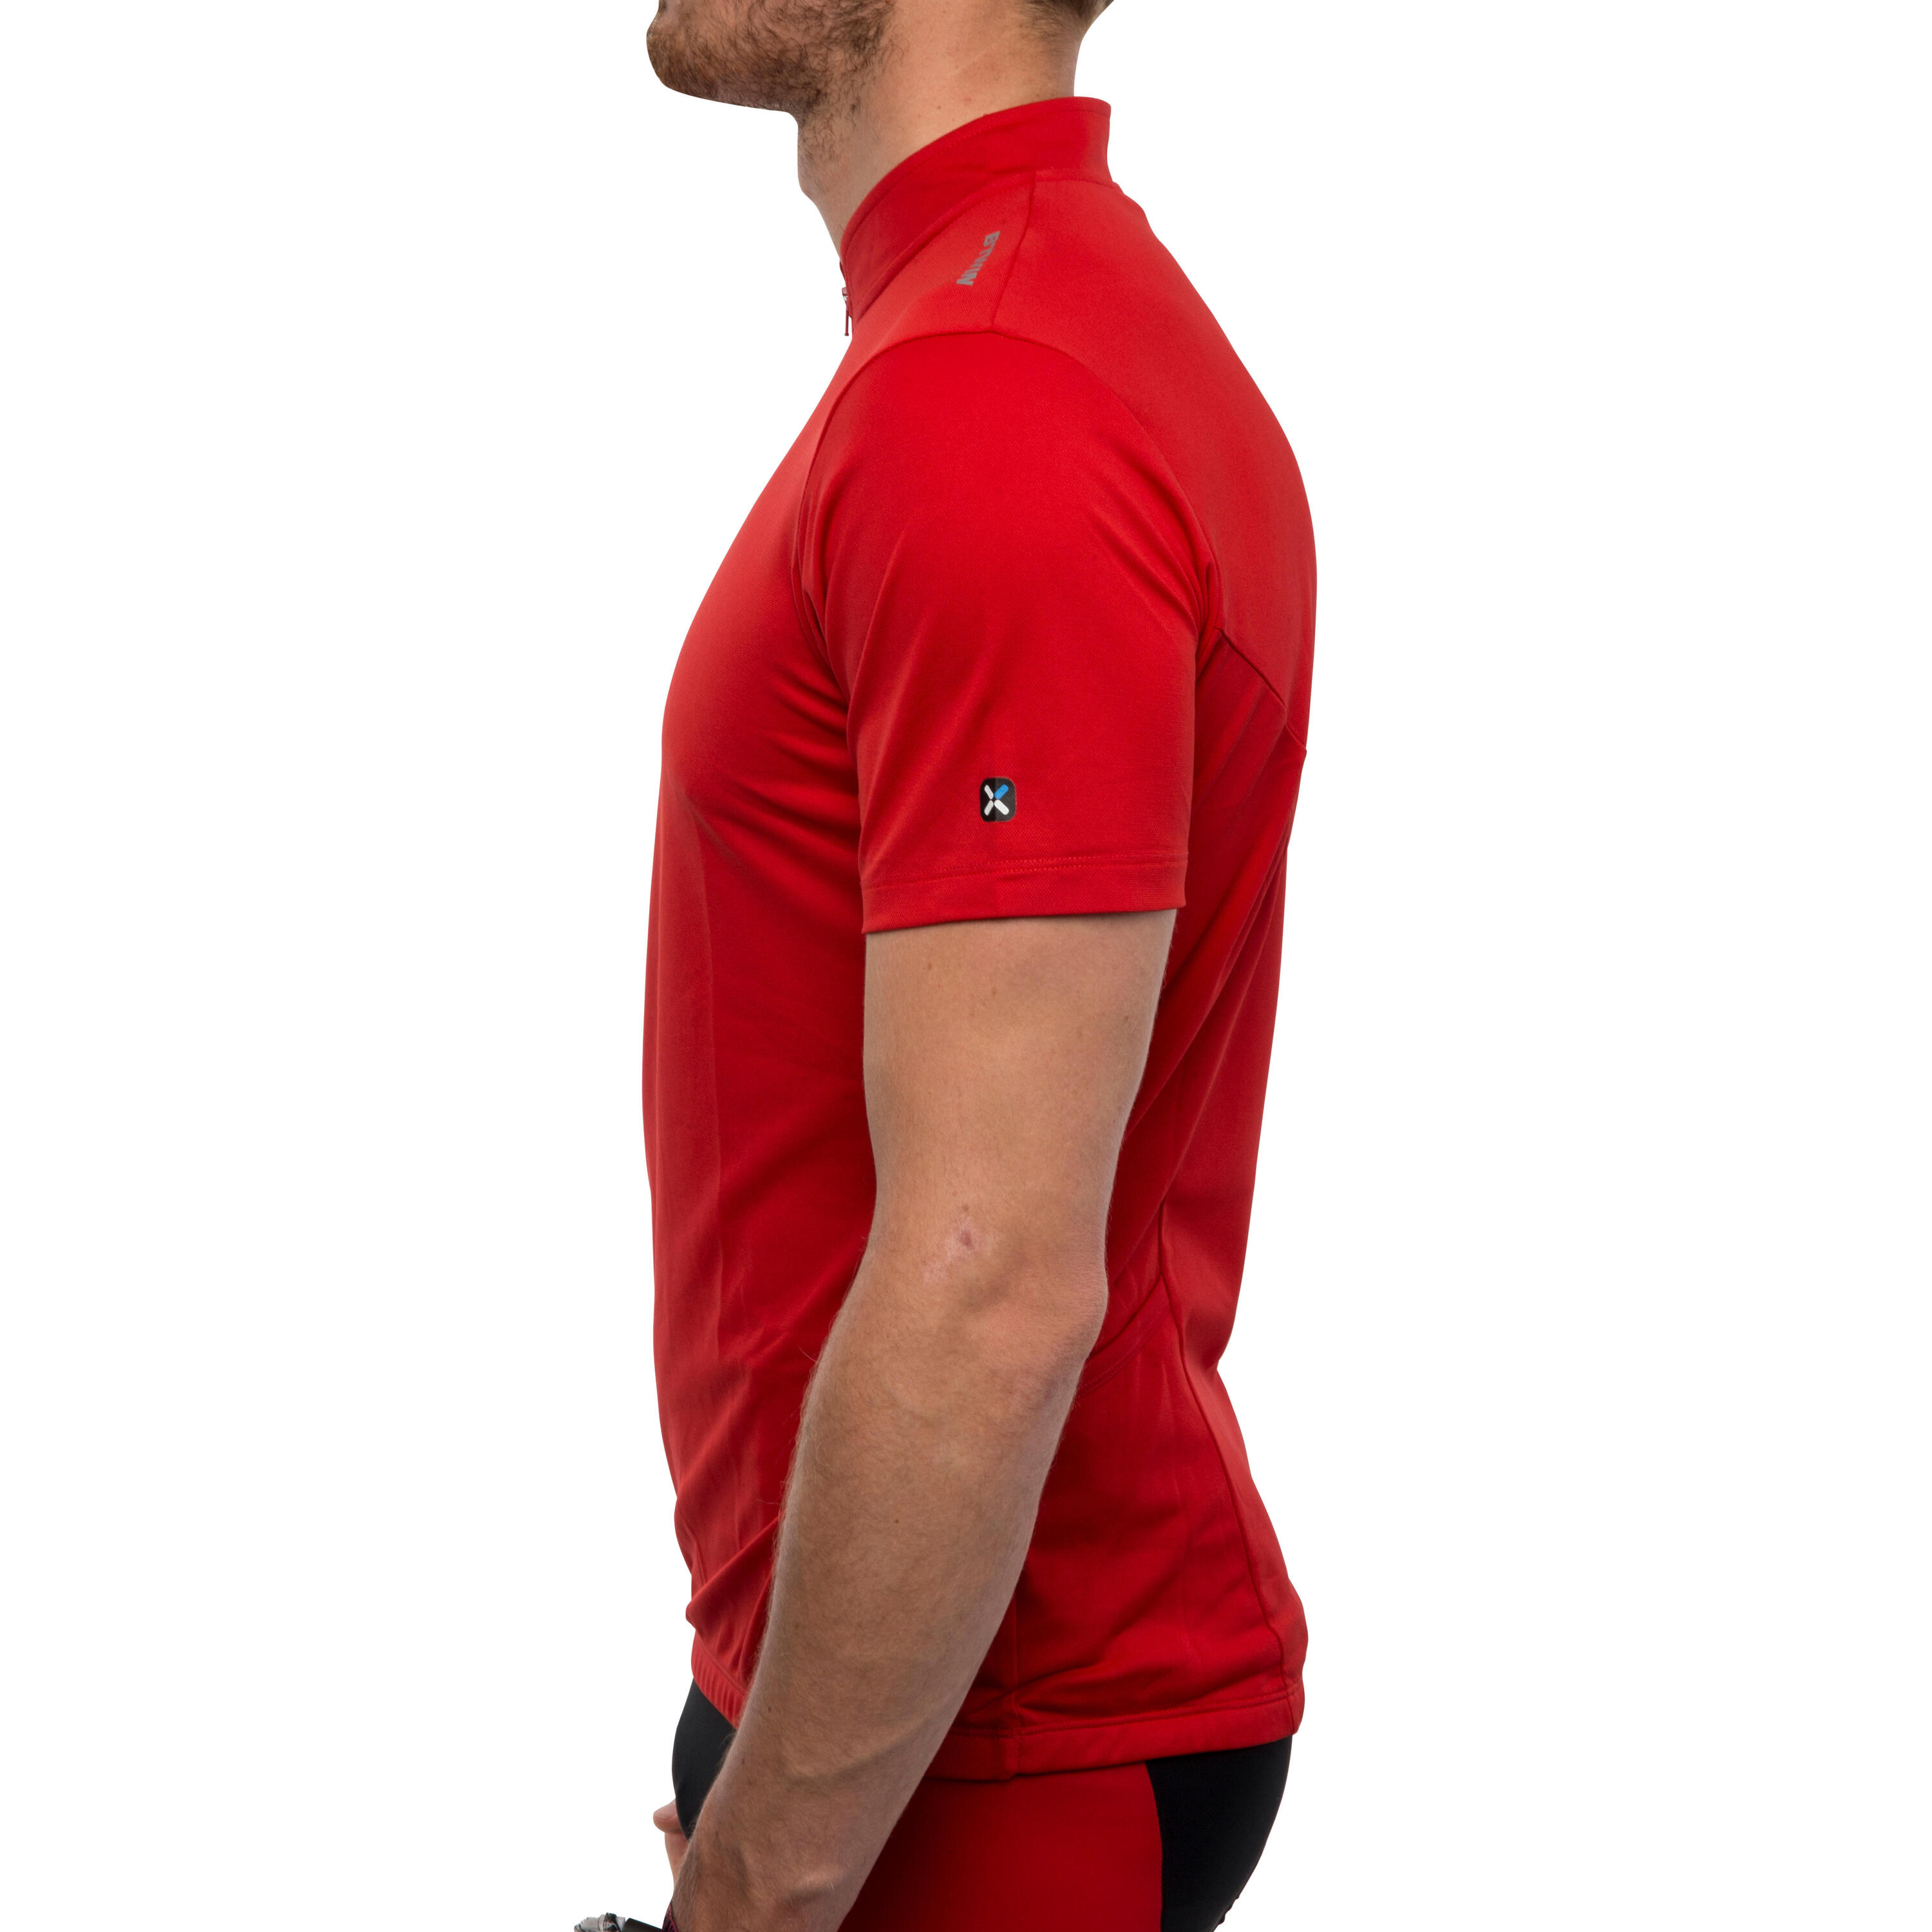 Roadcycling 100 Short-Sleeved Cycling Jersey - Red 5/11